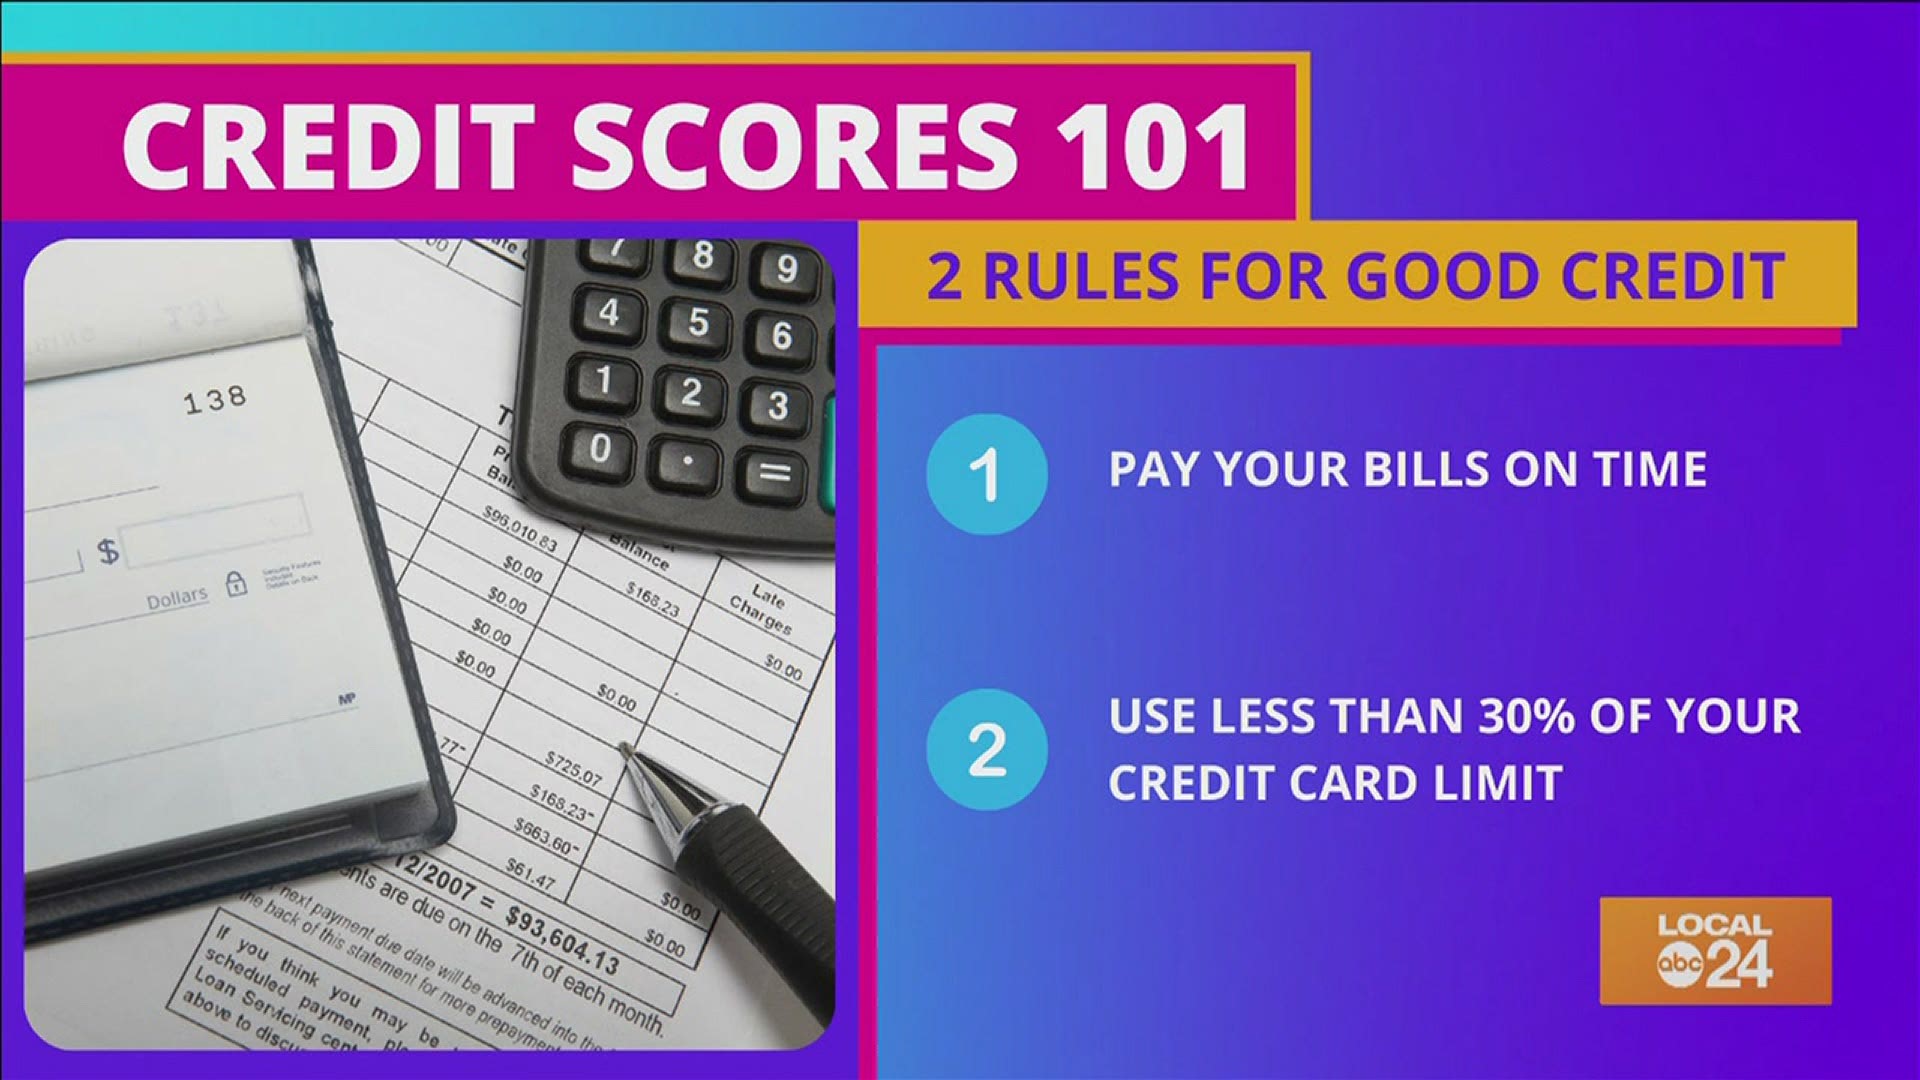 Looking to boost your credit score, but don't know where to start? Lucky you,  Sydney Neely has you covered on this week's "The Shortcut": Beginner's edition!